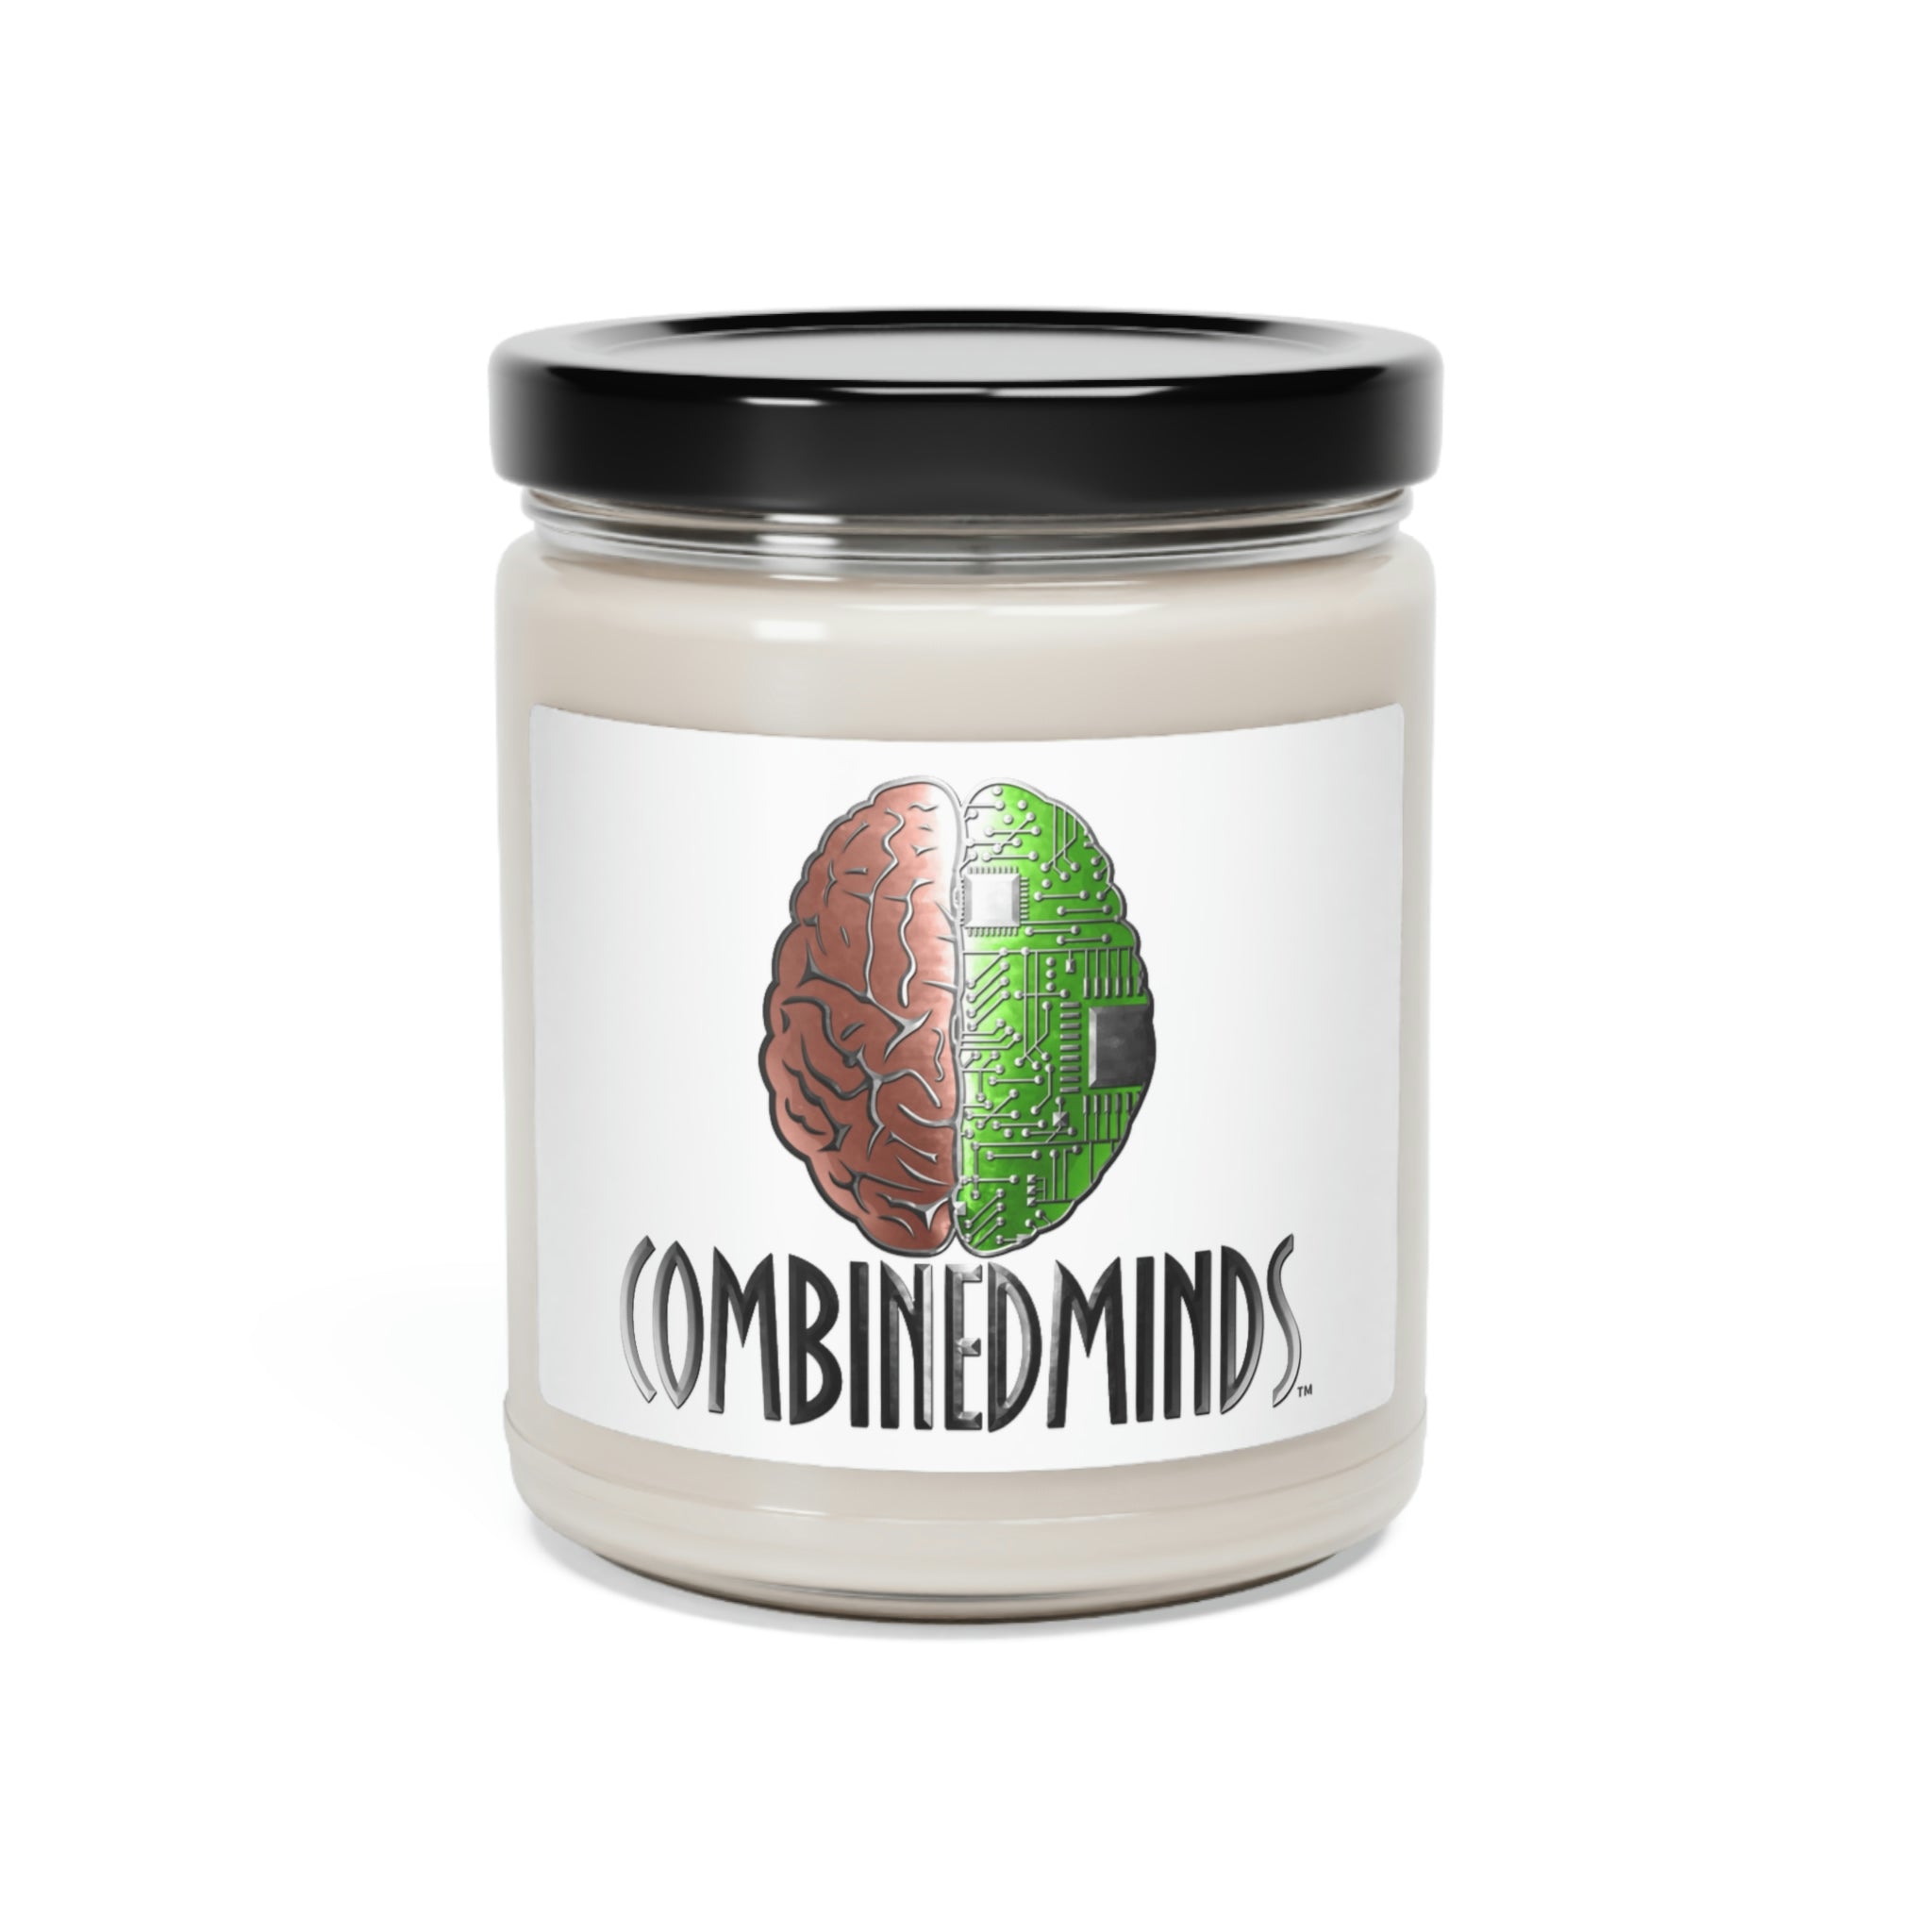 CombinedMinds Scented Soy Candle, 9oz